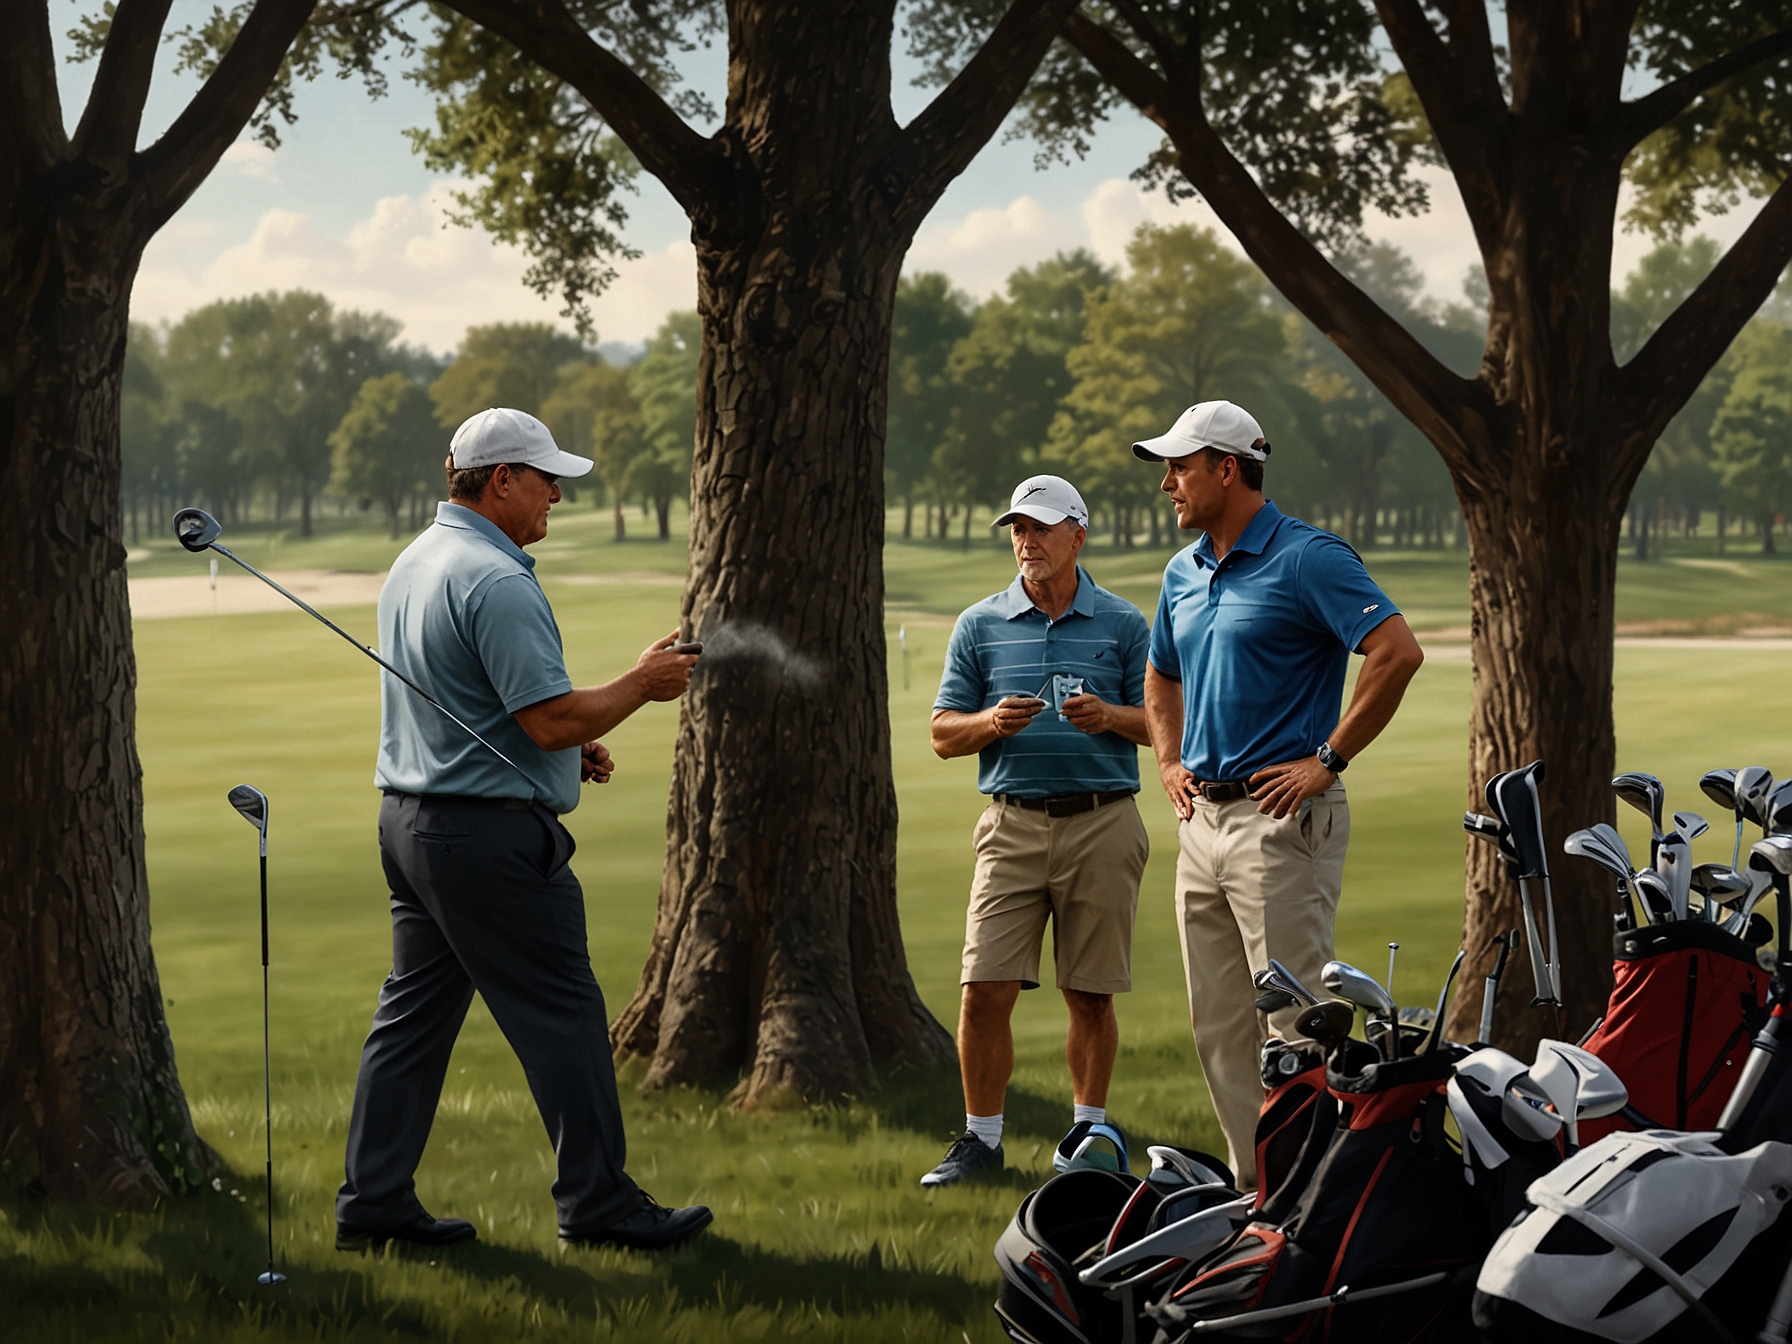 A scene on an Ohio golf course where three groups of golfers argue and brandish their clubs like swords, with onlookers gathering and some recording the event on their phones.